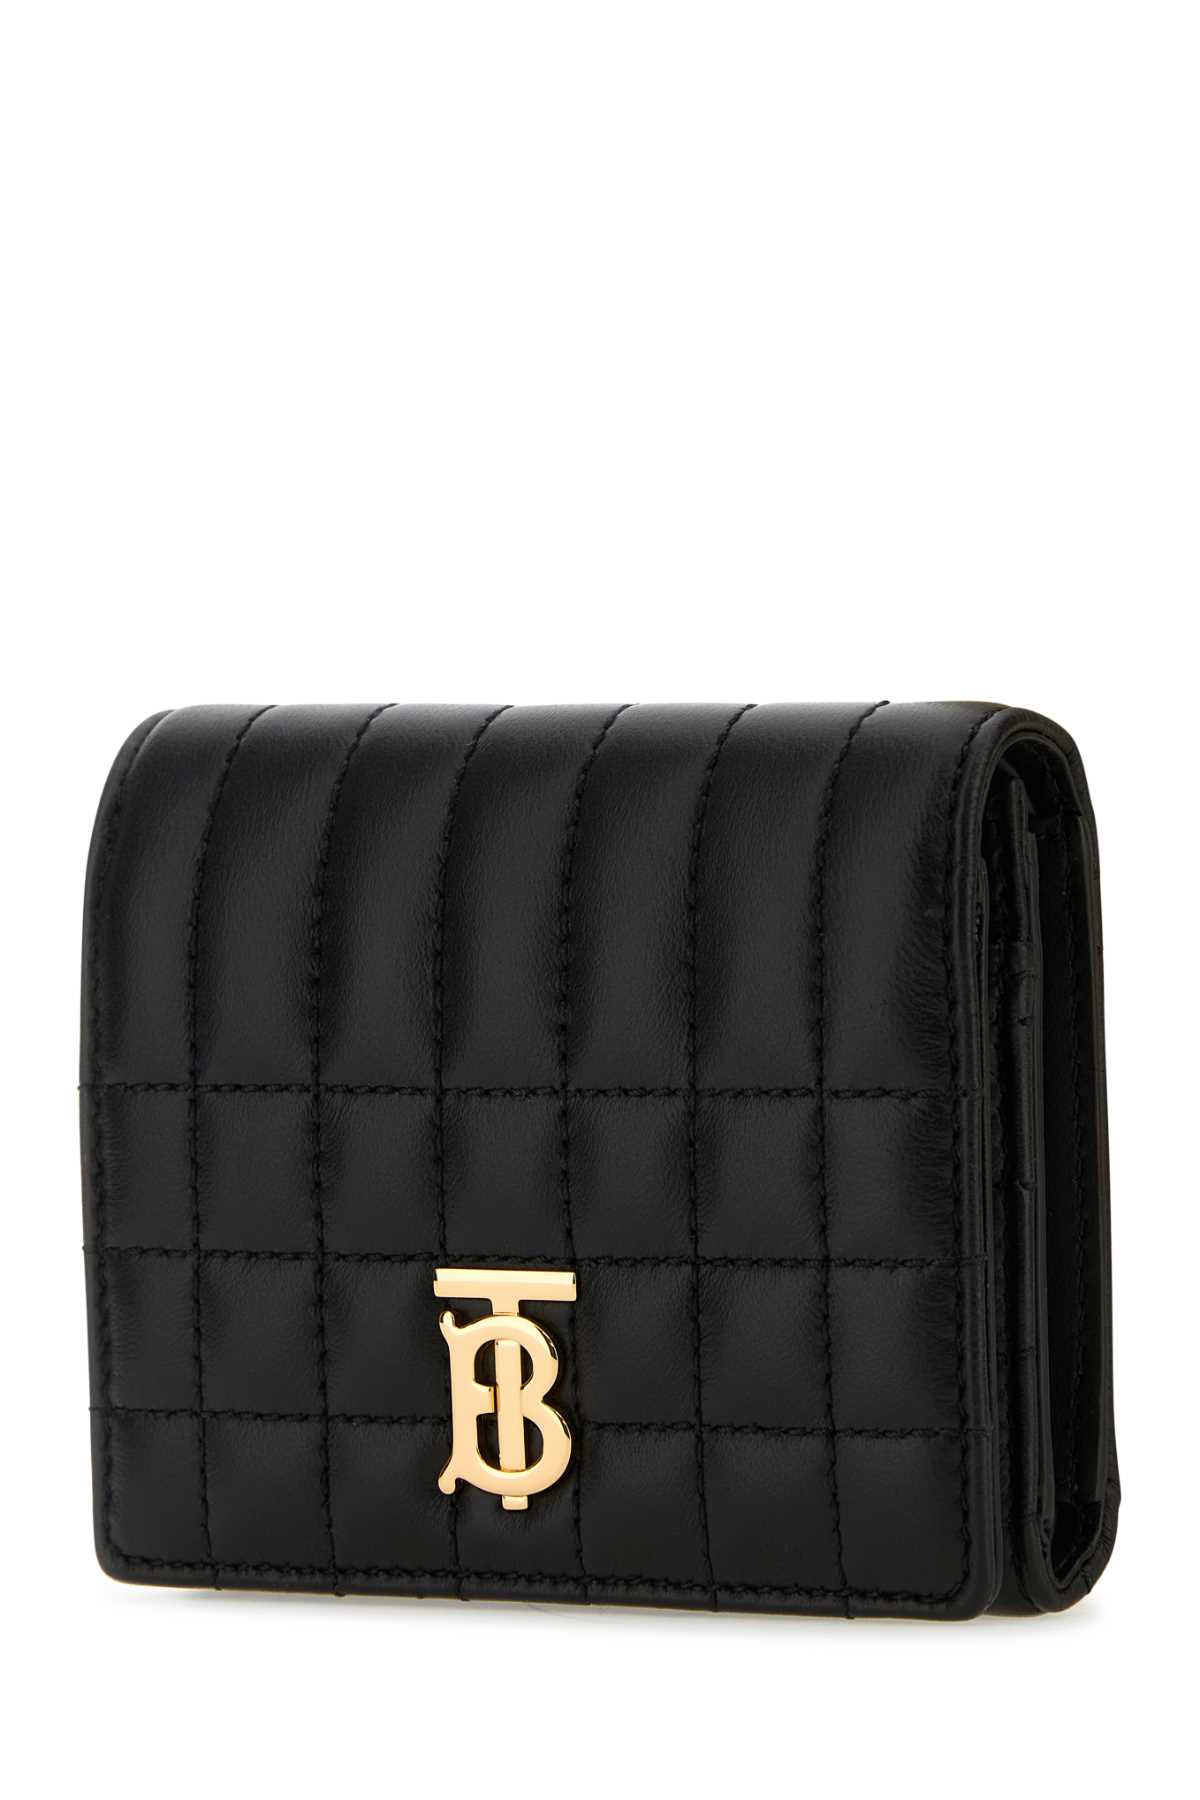 Shop Burberry Black Nappa Leather Wallet In A7527